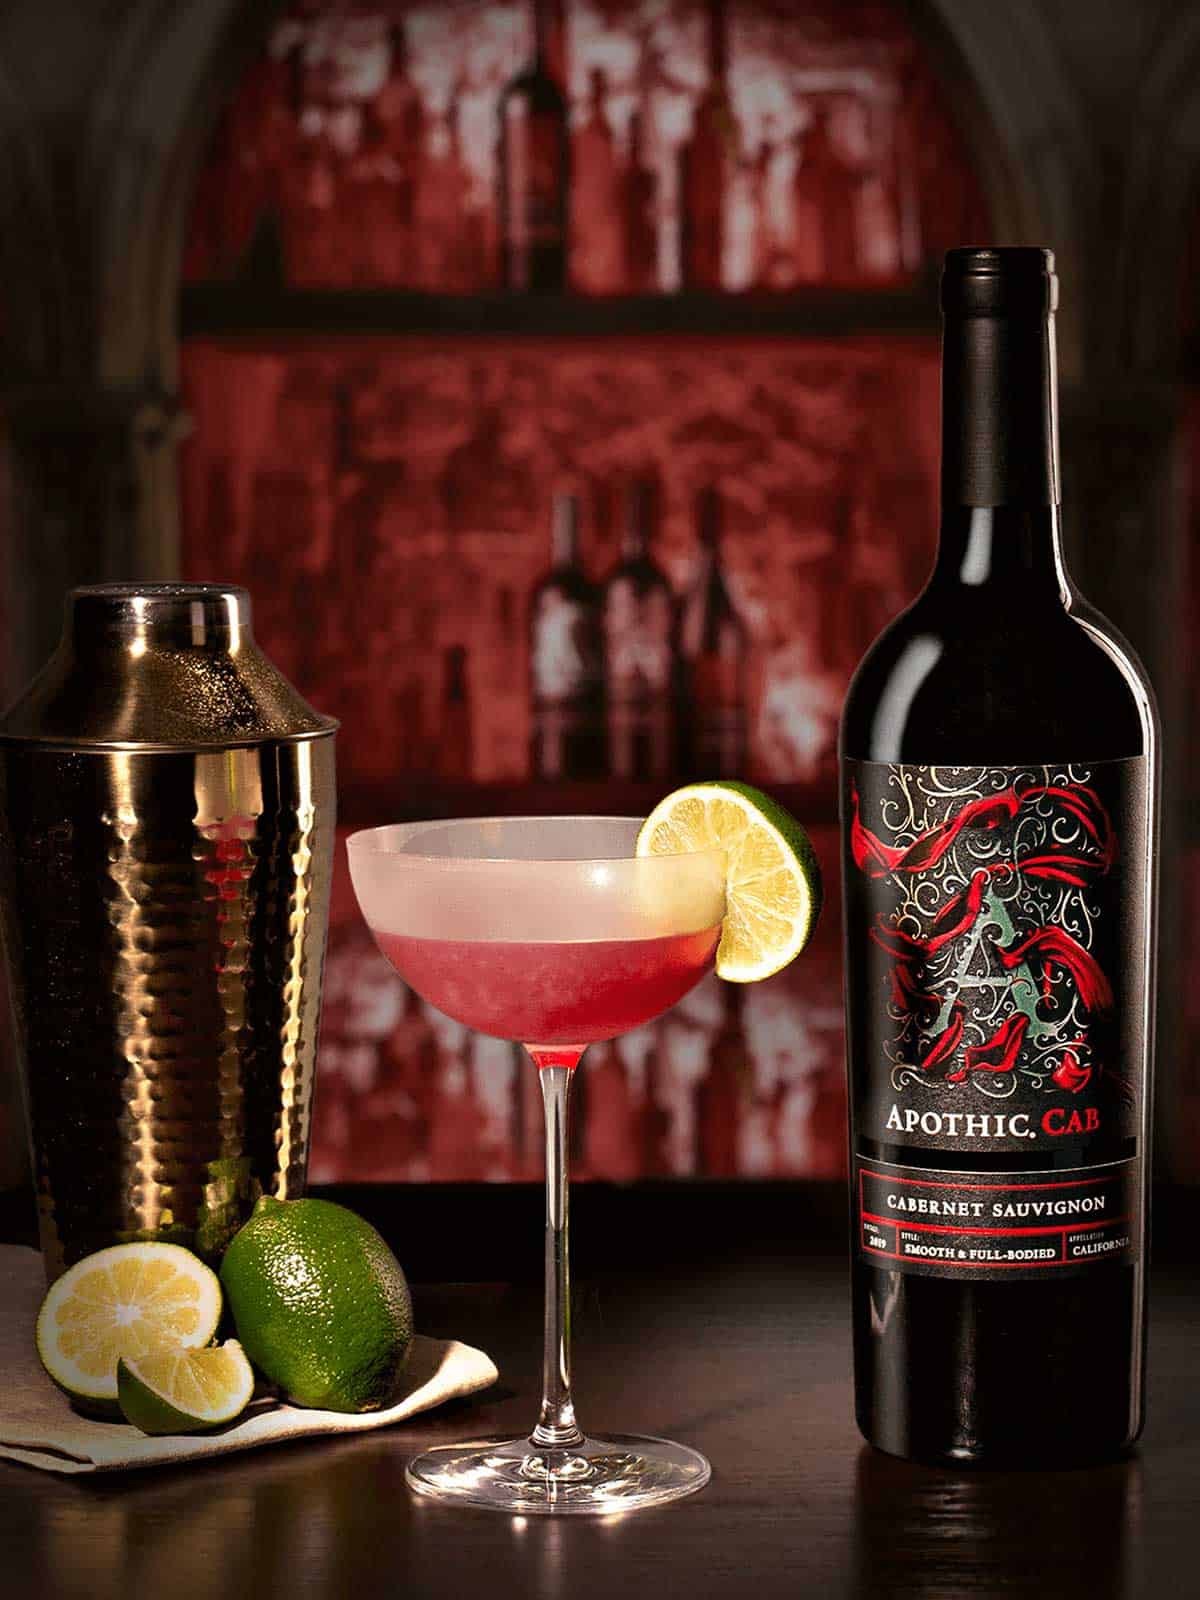 A glass of the bishop cocktail with a shaker, limes and a bottle of Apothic cabernet sauvignon